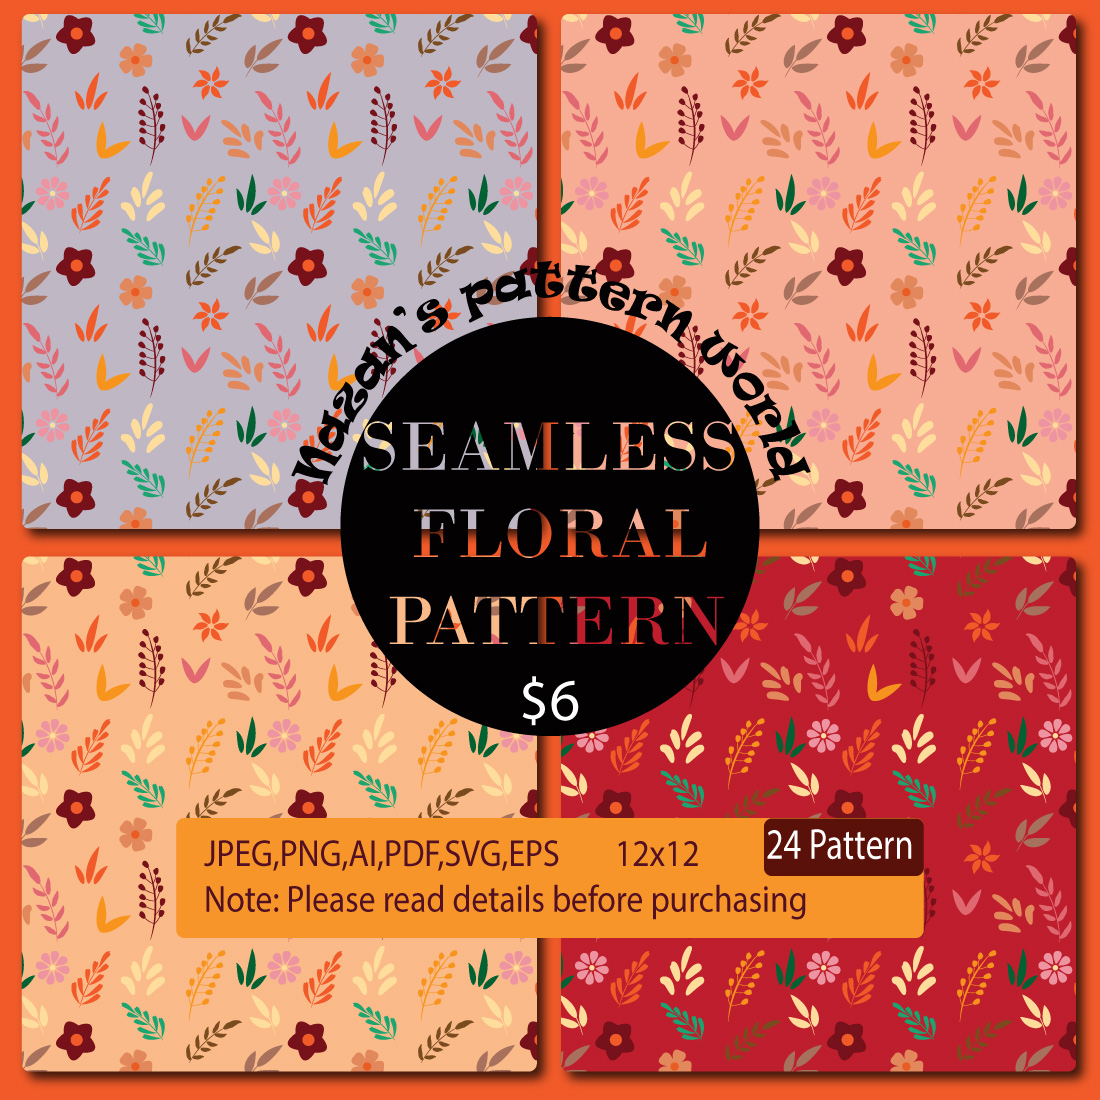 Seamless Floral Pattern cover image.